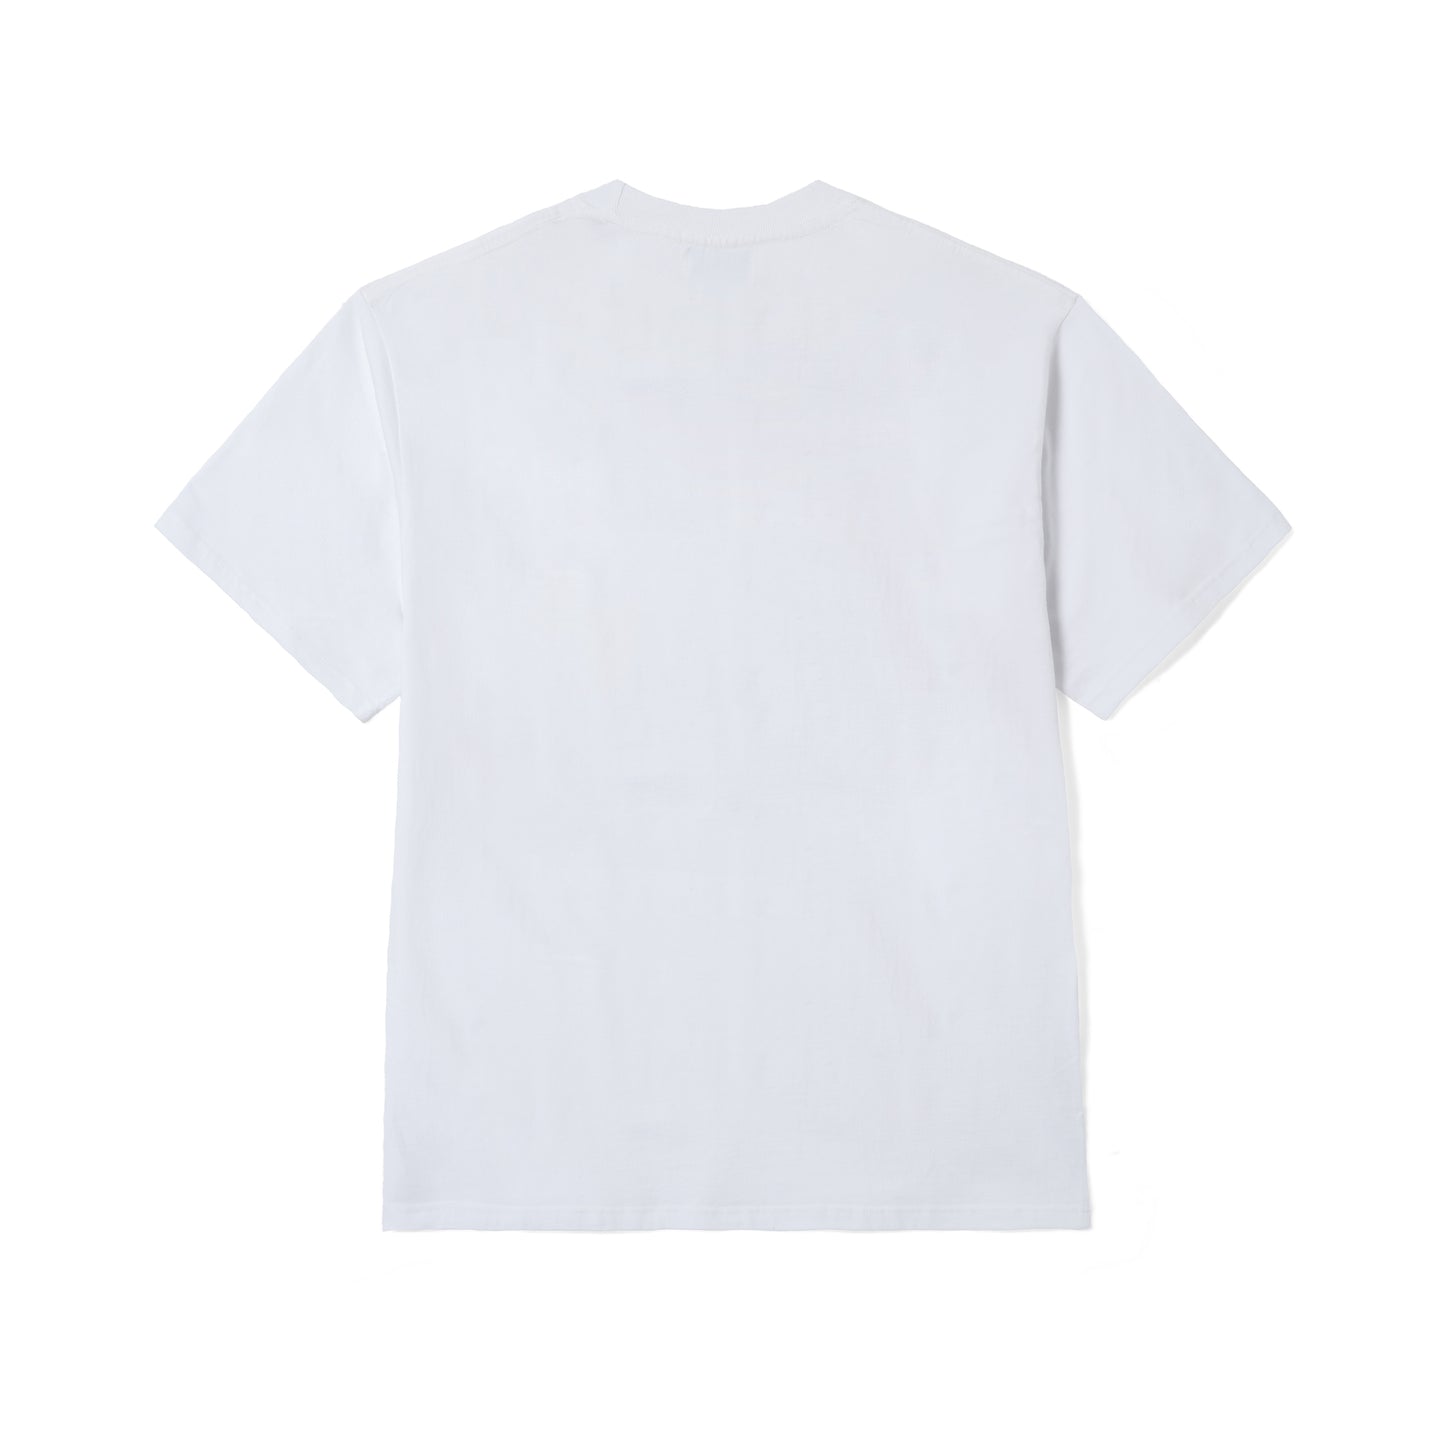 CLOUDY TEE IN WHITE